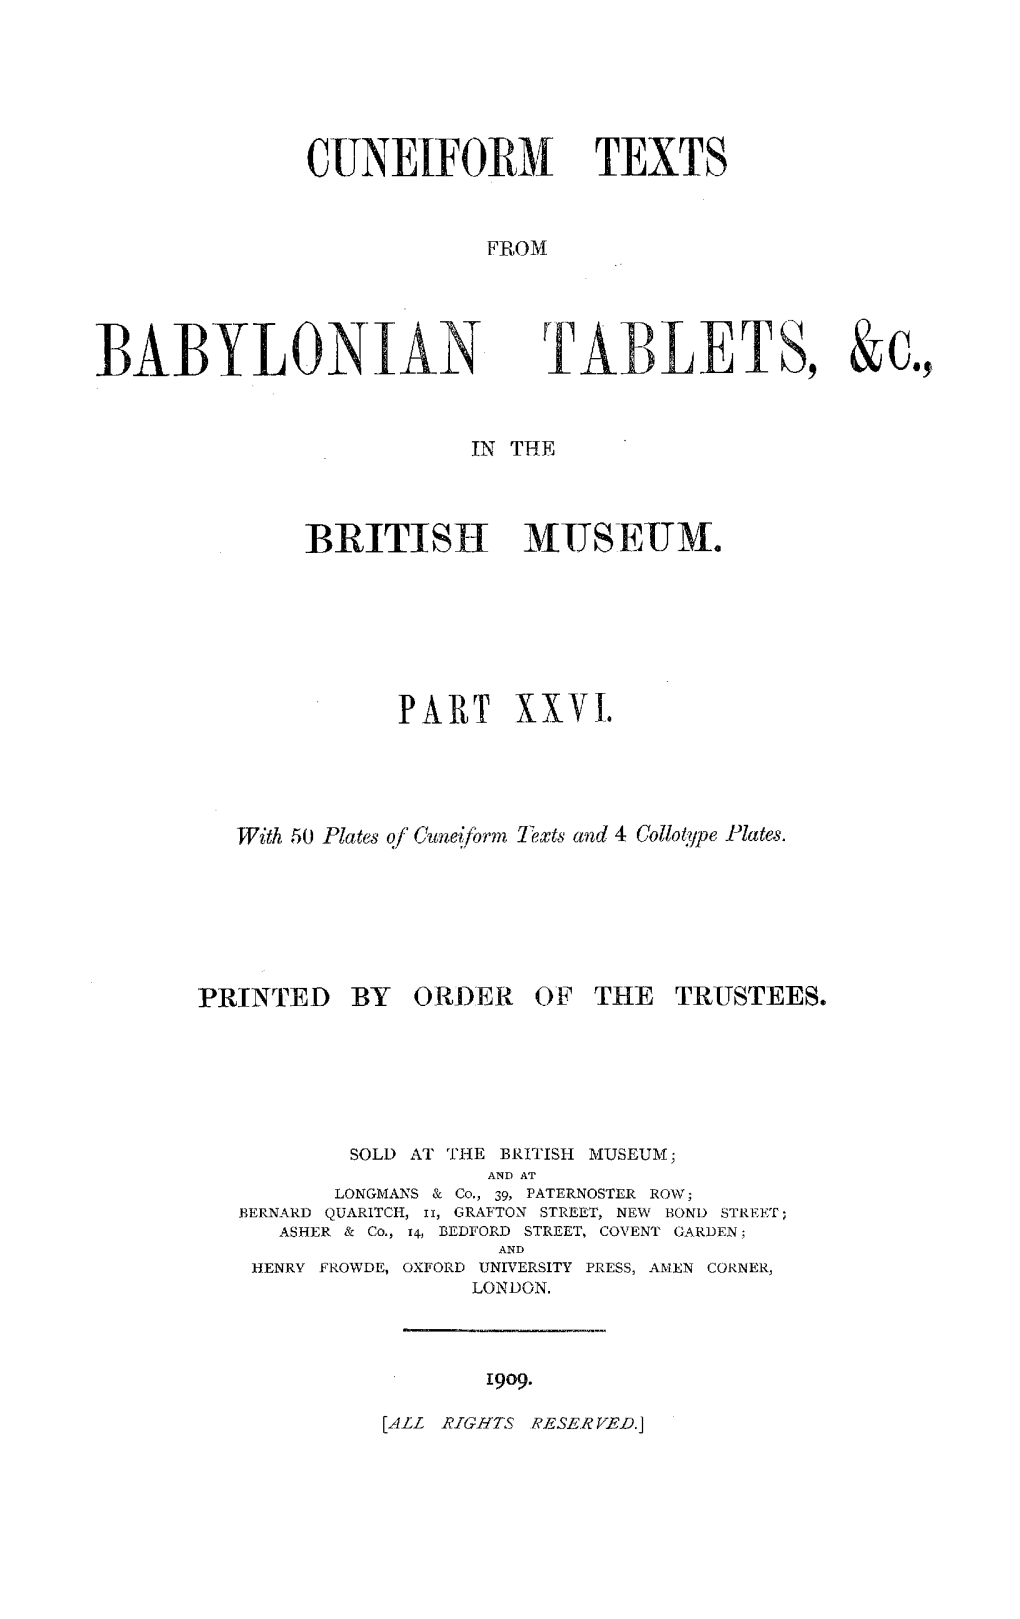 Cuneiform Texts from Babylonian Tablets, &C. in the British